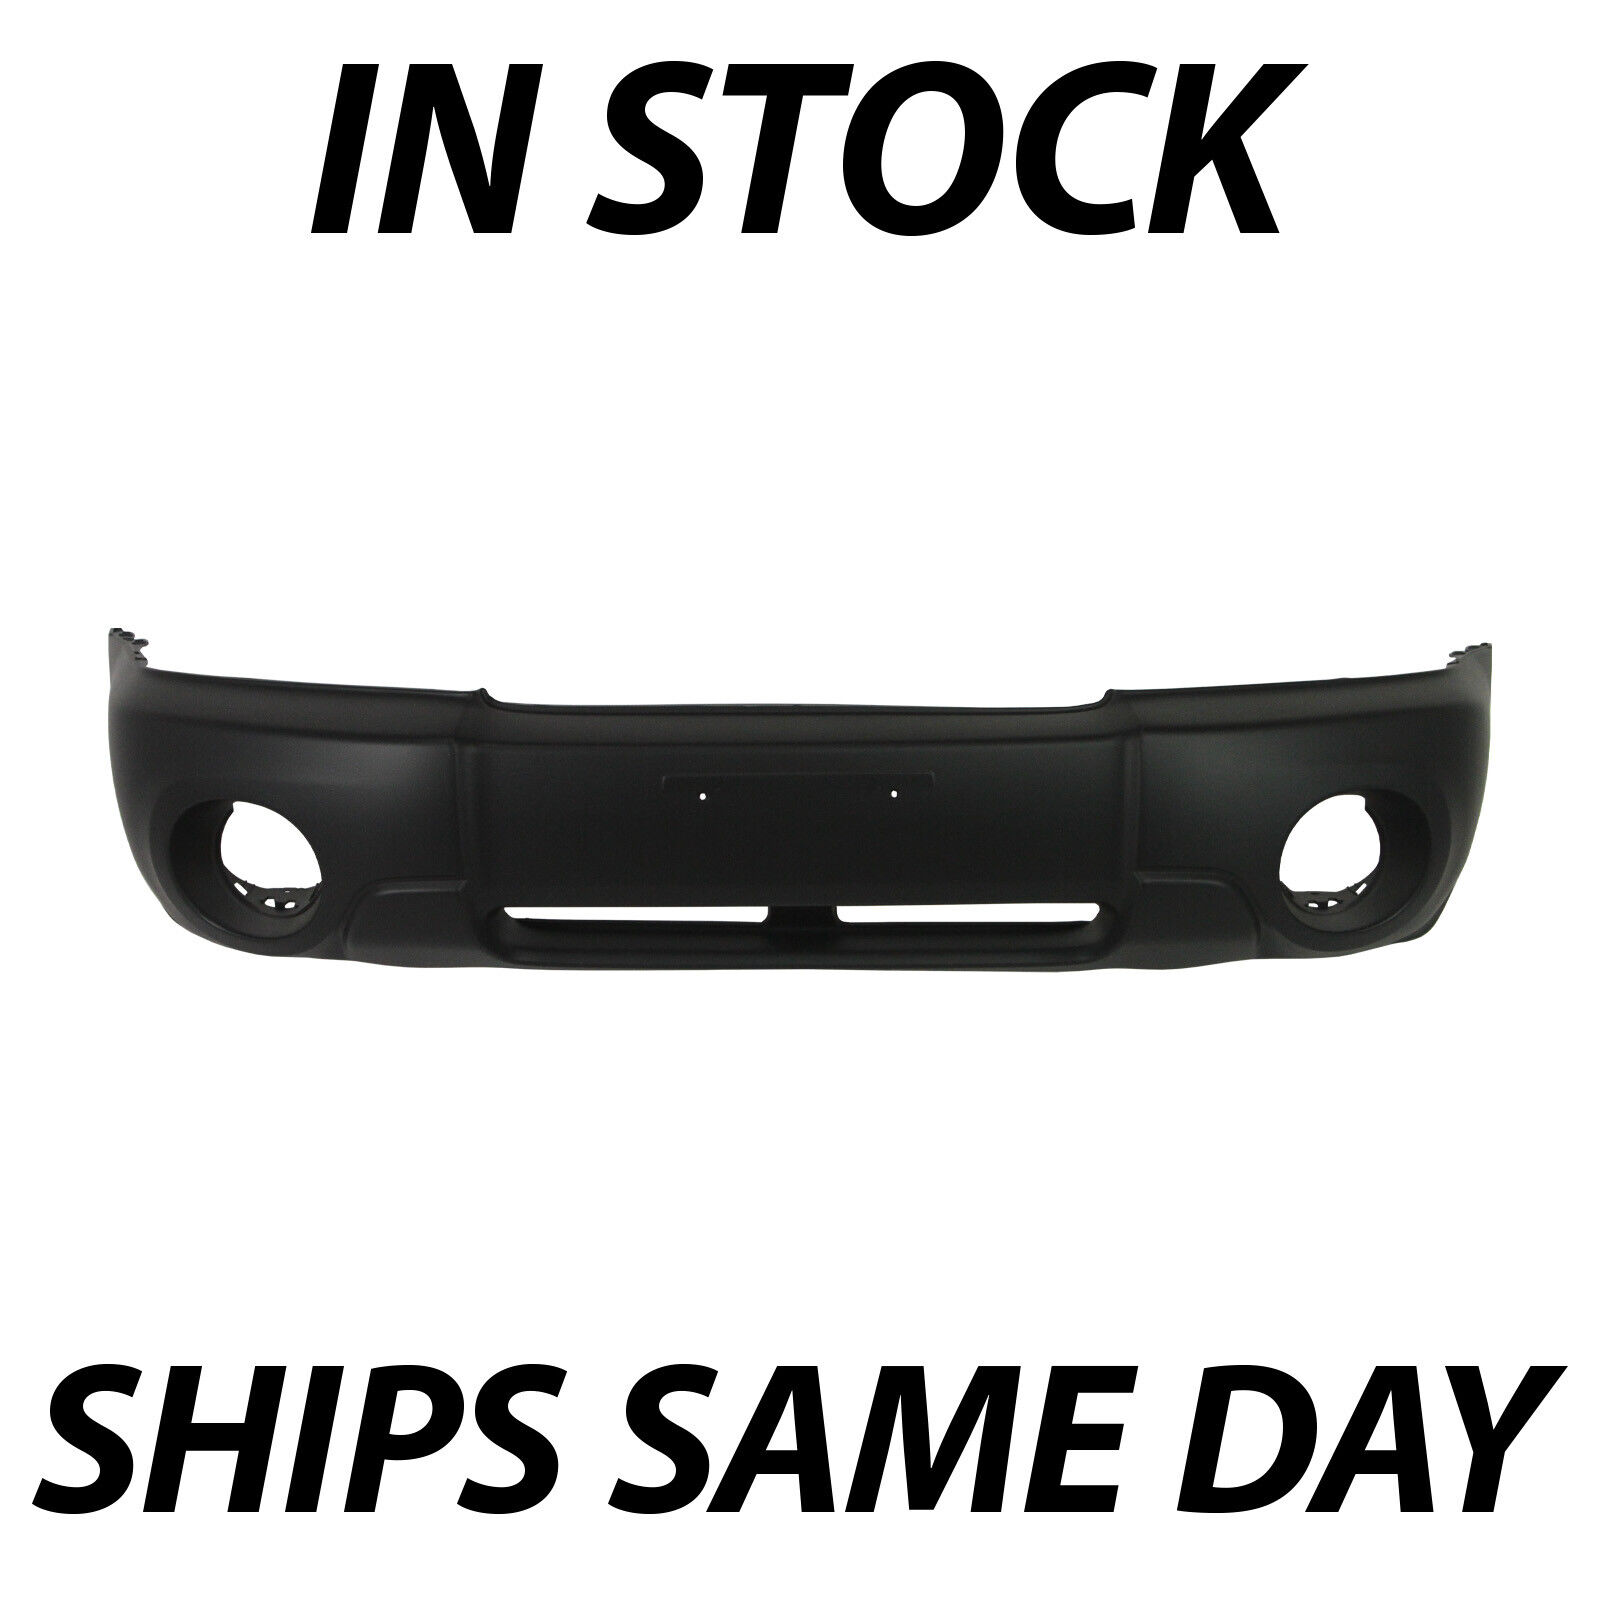 NEW Primered - Front Bumper Cover Replacement for 2003 2004 2005 Subaru Forester